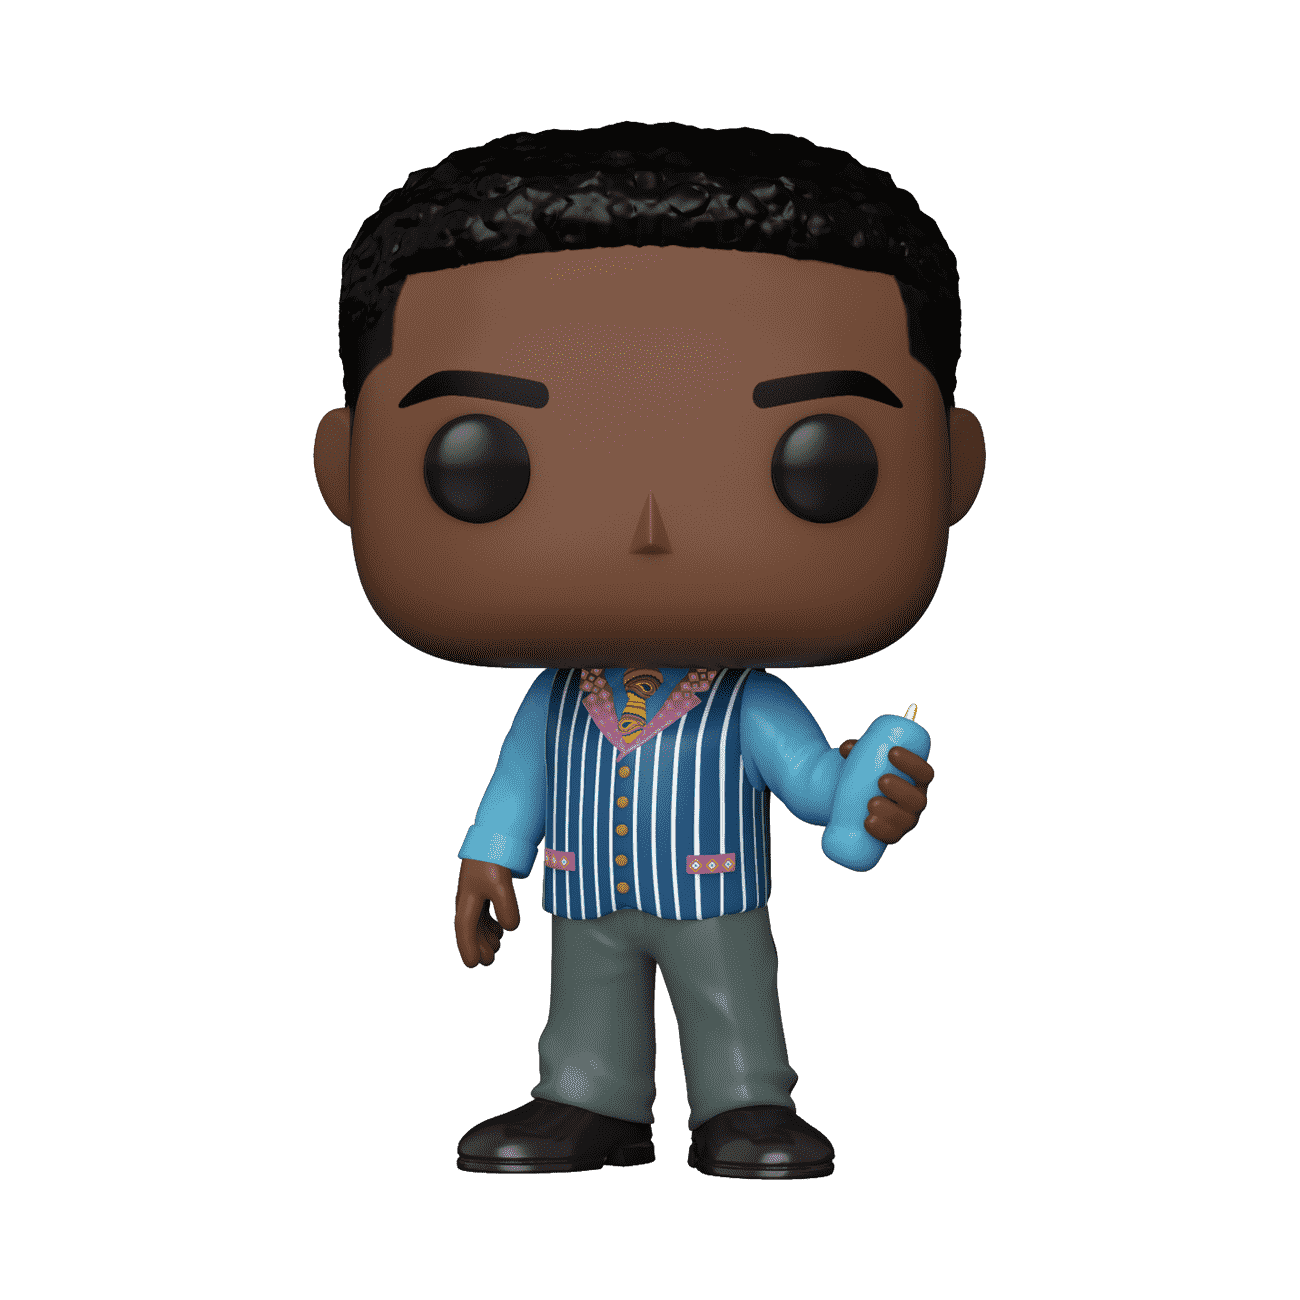 Buy Pop! Gilbert with Candle at Funko.